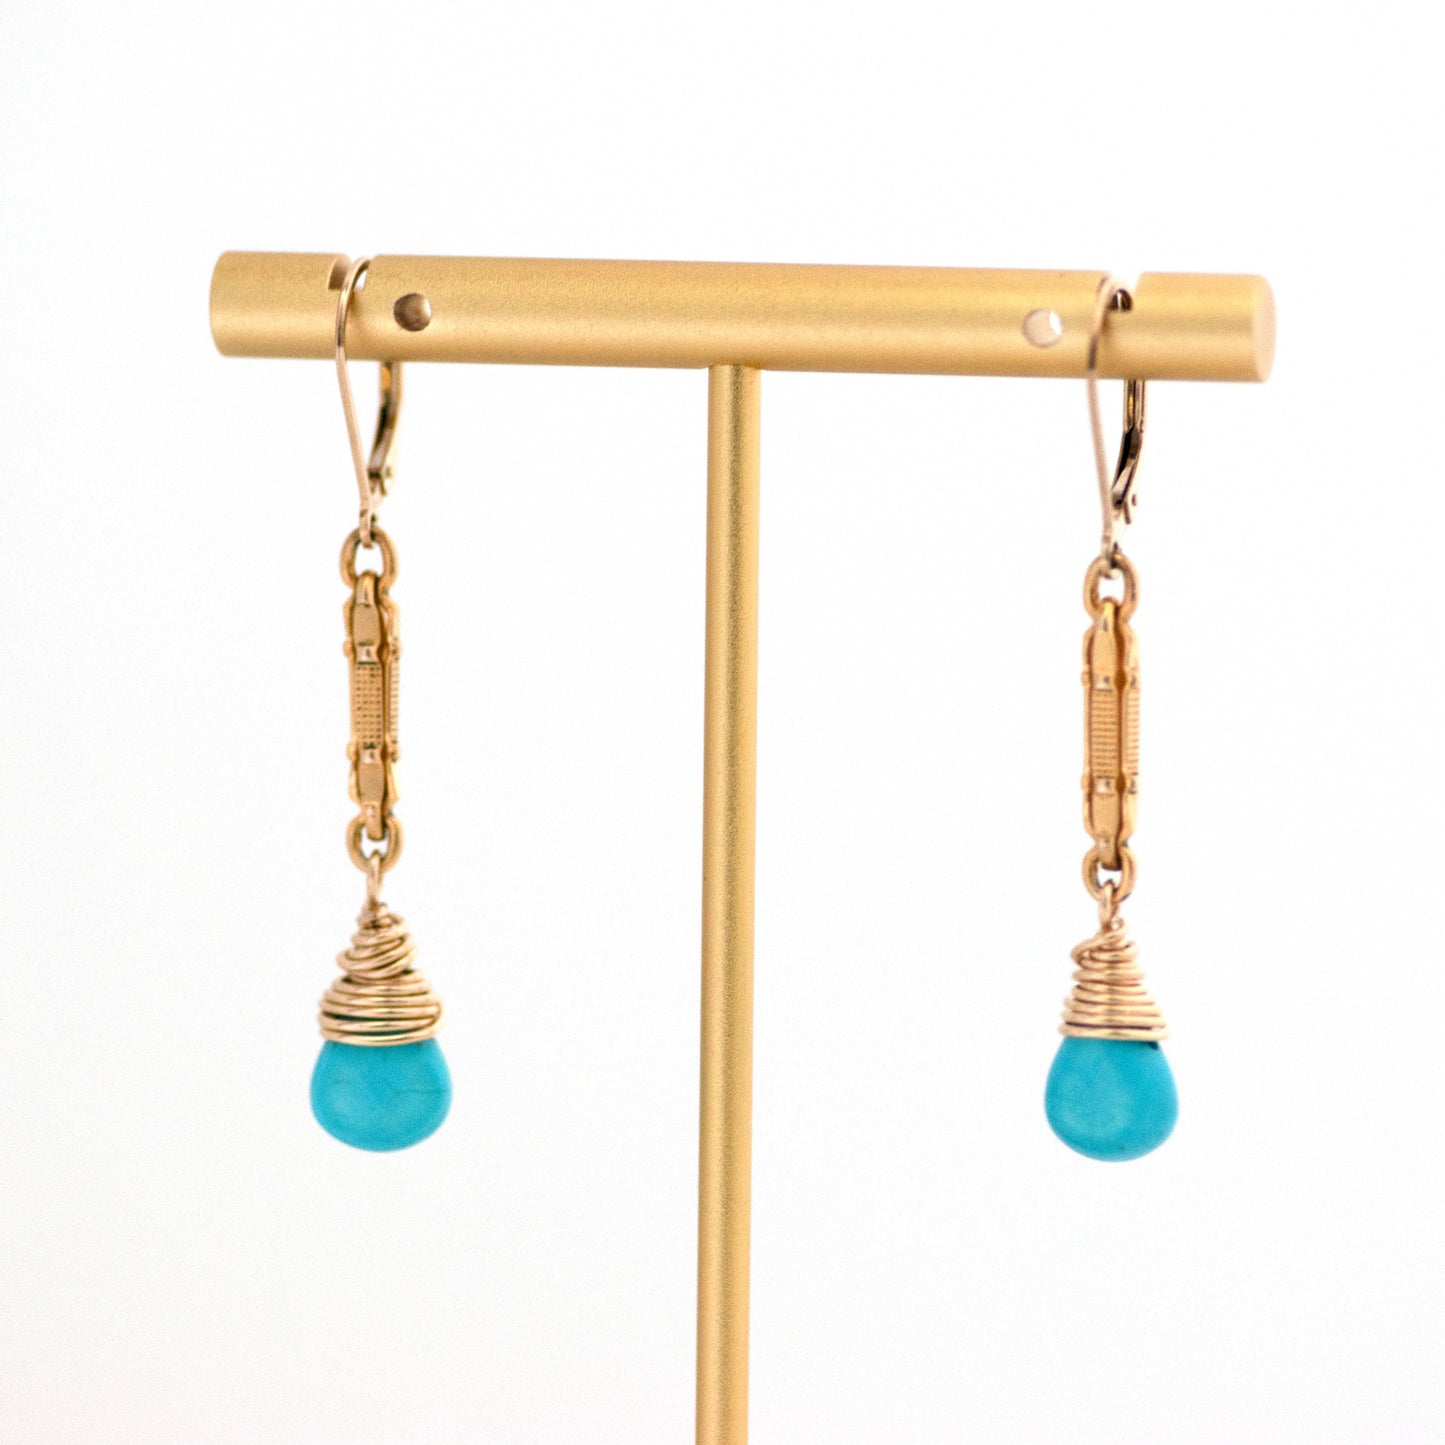 These one-of-a-kind conversion earrings are made up of:  Gold filled antique Victorian watch chain links from the late 1800s with hand tooled details and wire wrapped Arizona turquoise briolettes. Earrings are hanging from a gold T bar earrings stand display.